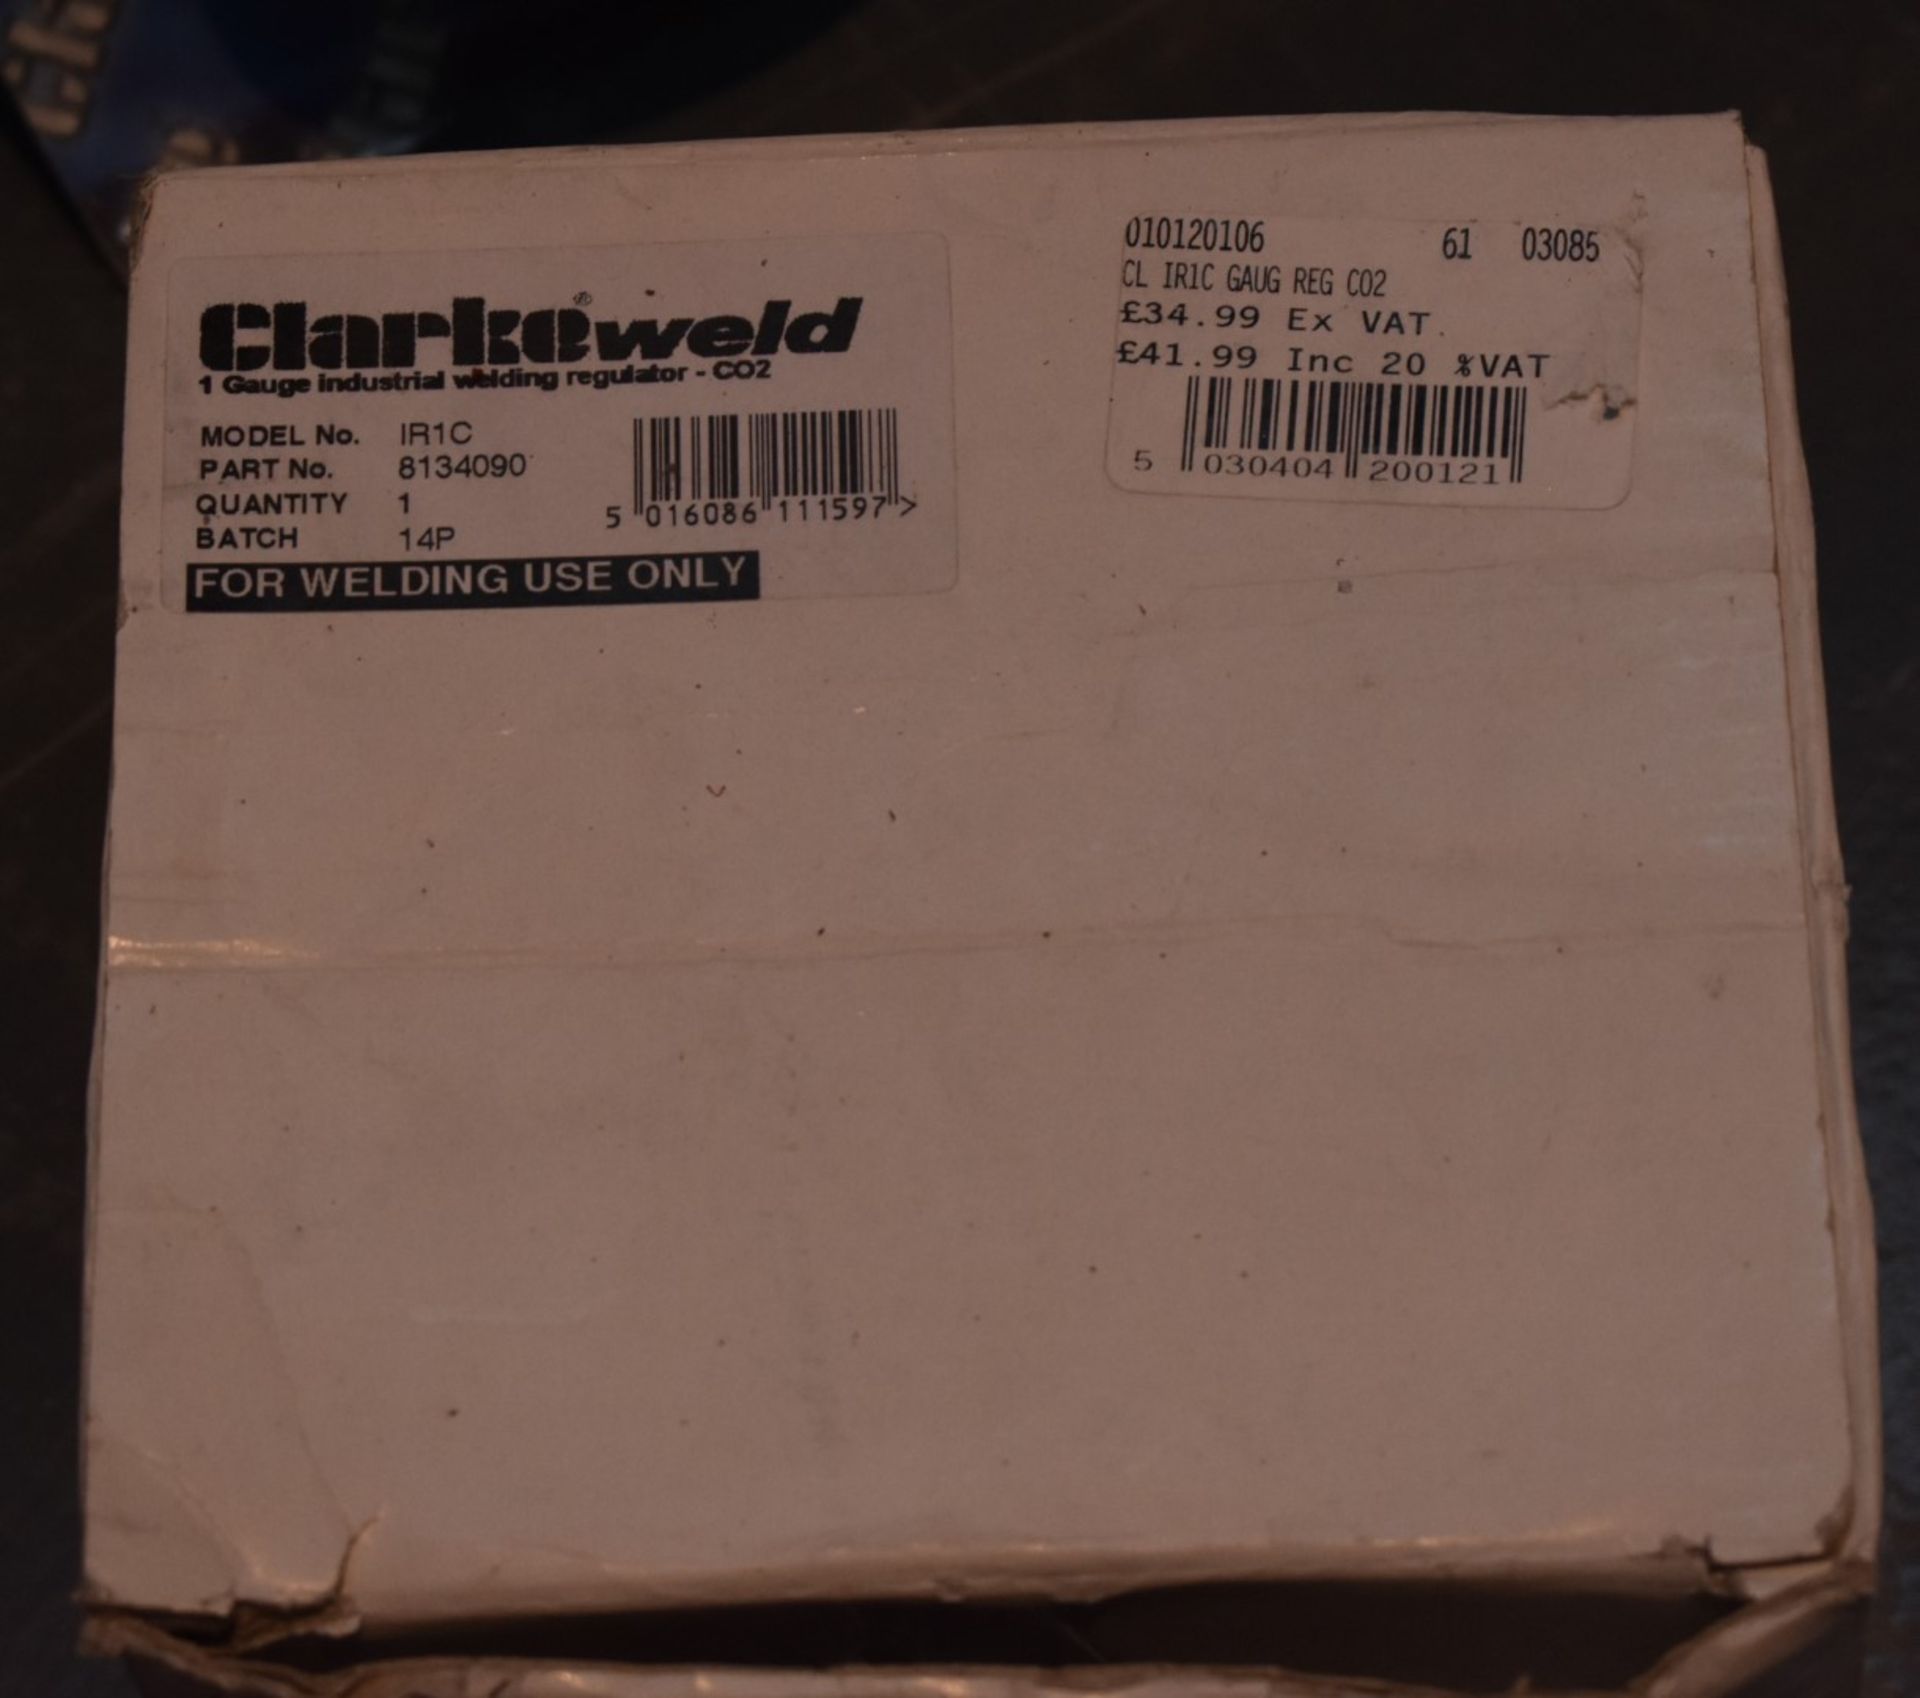 1 x Clarke MIG160EN Turbo No-Gas/Gas MIG Welder With Stand and Accessories - Ref 449 - CL501 - - Image 9 of 11